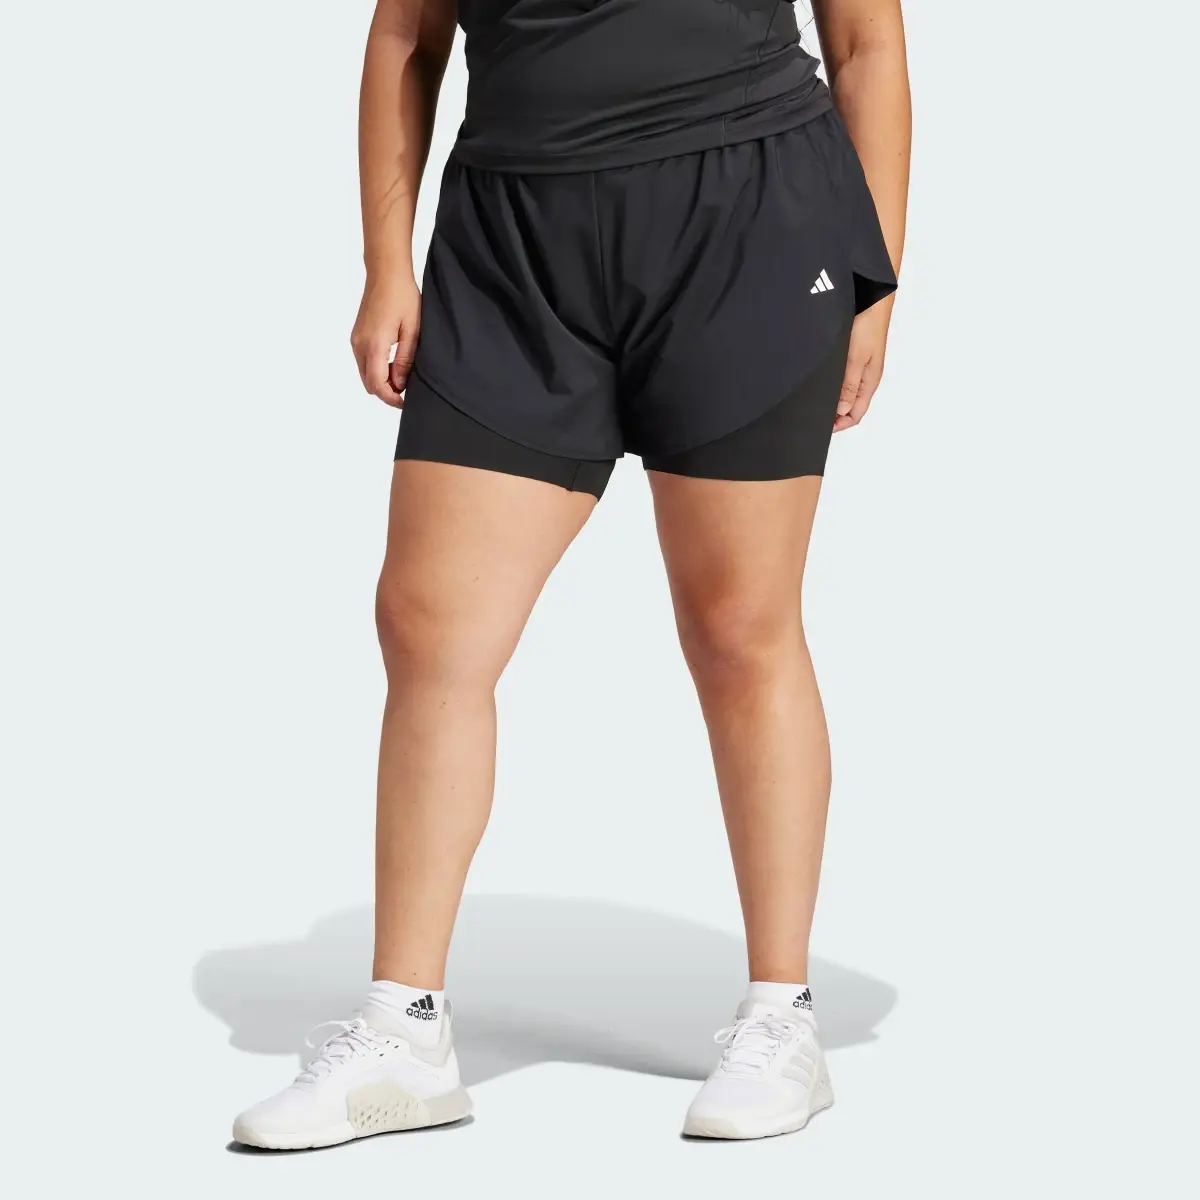 Adidas Designed for Training 2-in-1 Shorts (Plus Size). 1